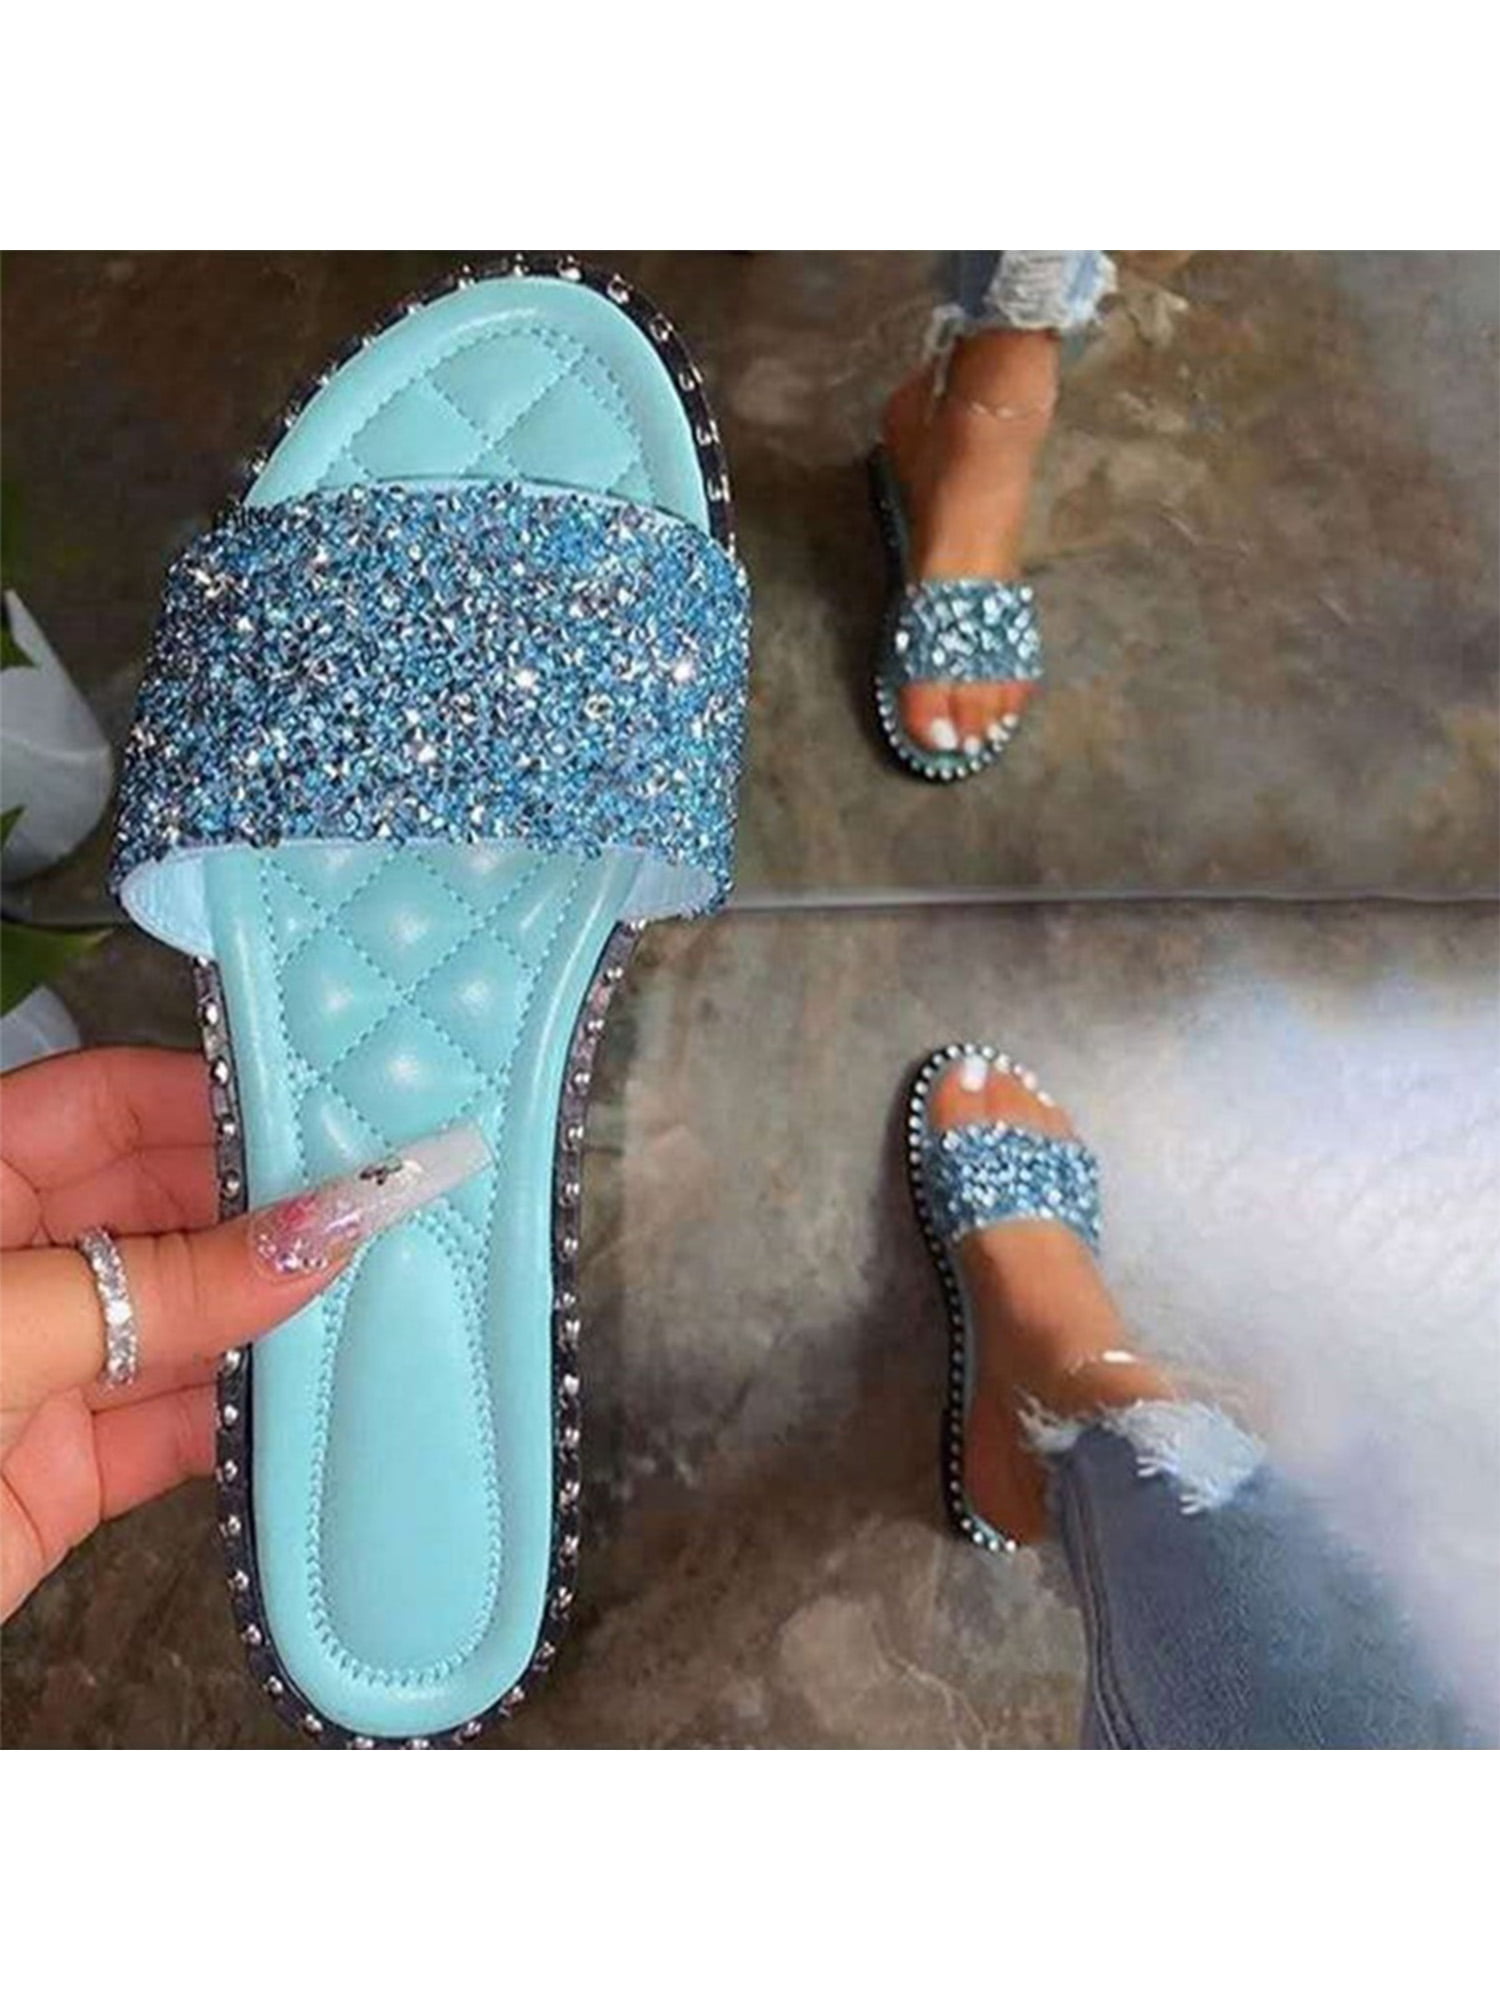 YIFANG Womens Glitter Bling Flip Flops Ladies Crystal Sliders Low Wedge Sparkle Sandals Slippers Mules Slip On Shoes 